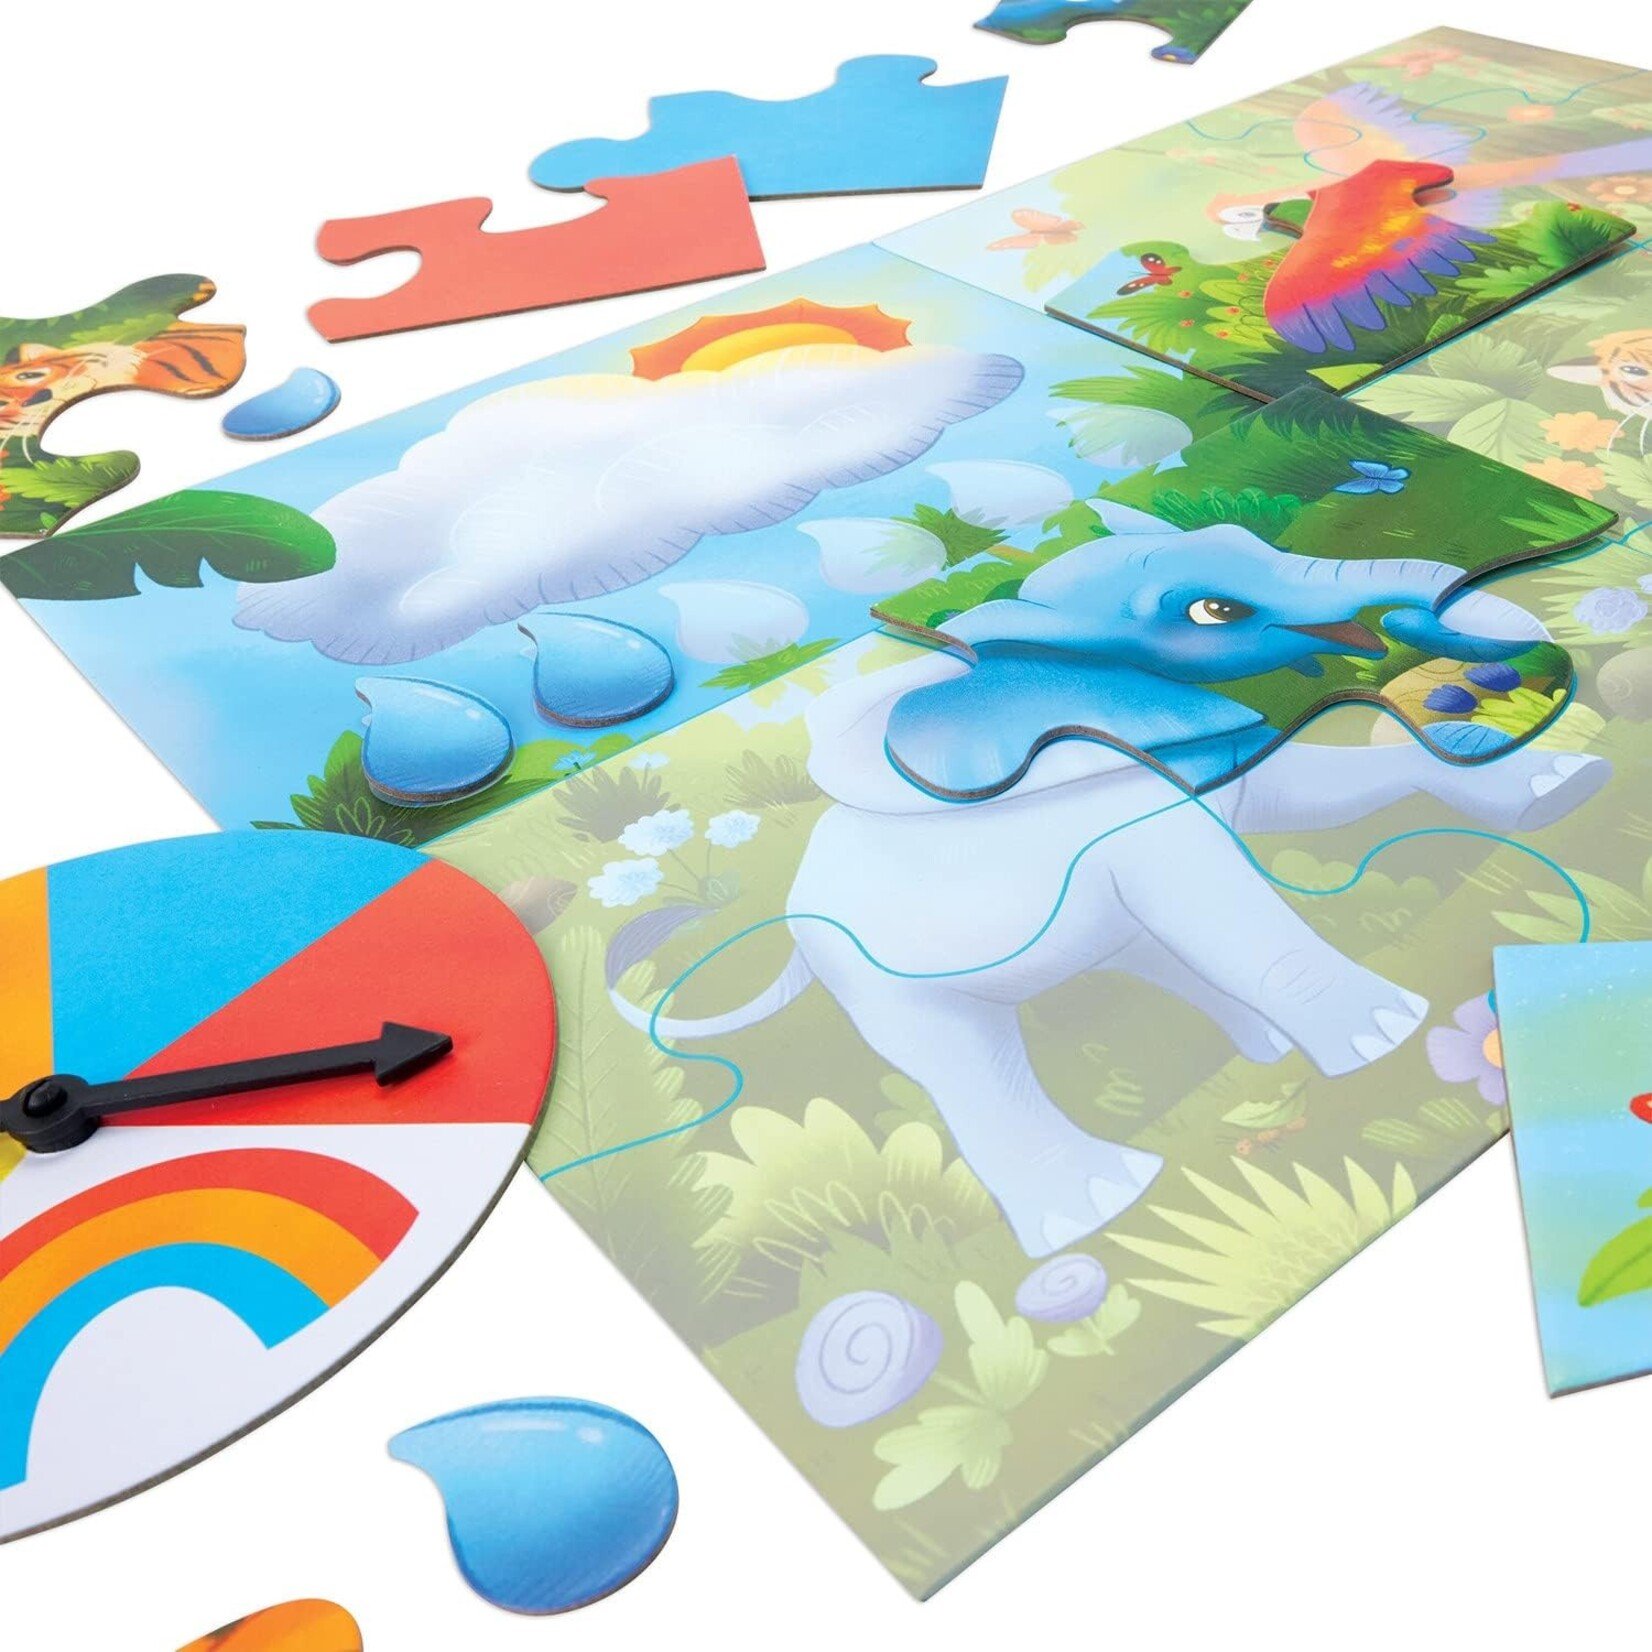 Peaceable Kingdom Raindrop Forest: The Rain or Shine Puzzle Game